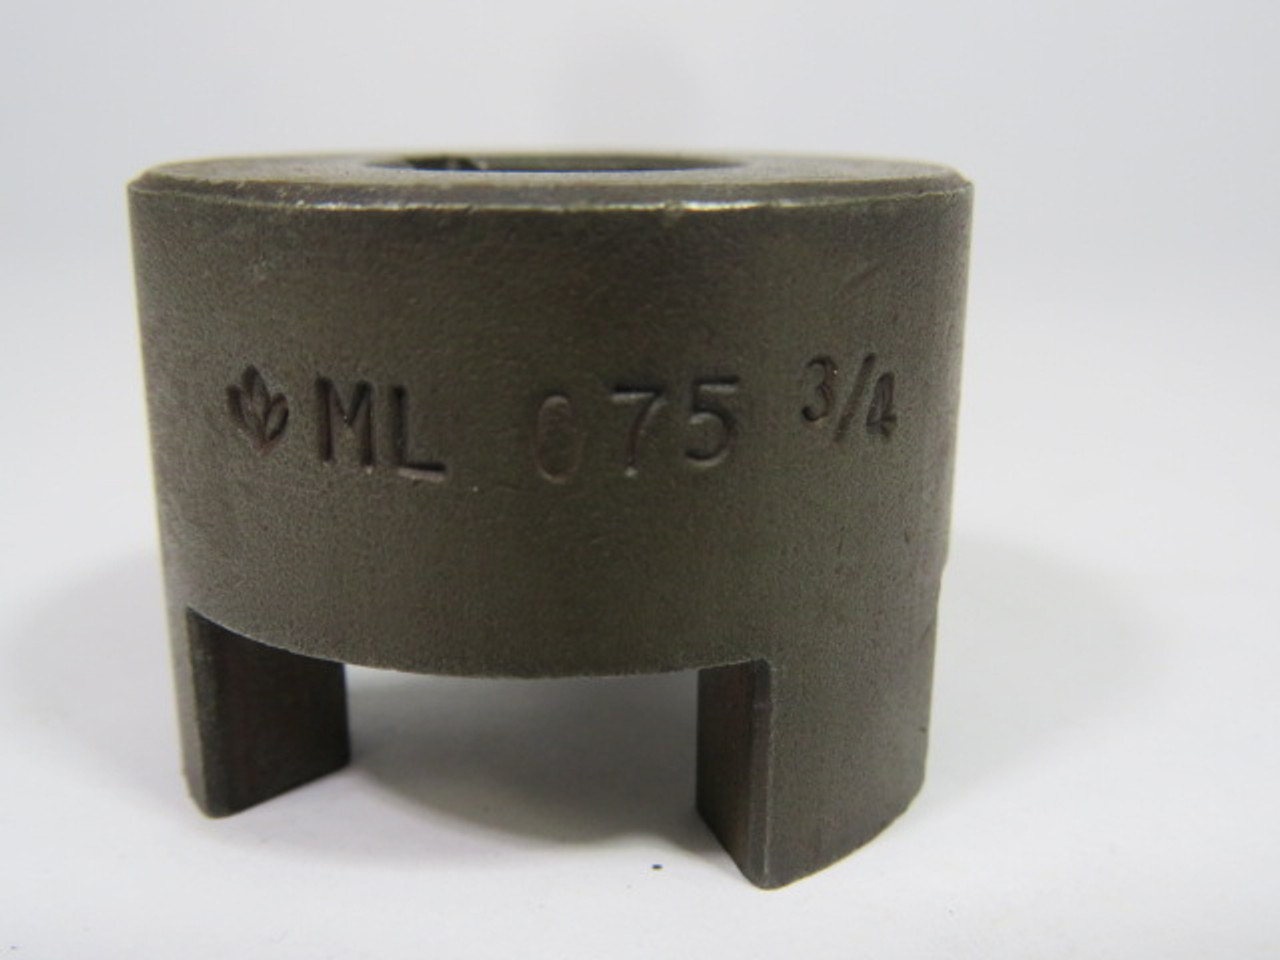 Martin ML075-3/4 Jaw Coupling 1-3/4" OD 3/4" Bore 13/16" LTB USED